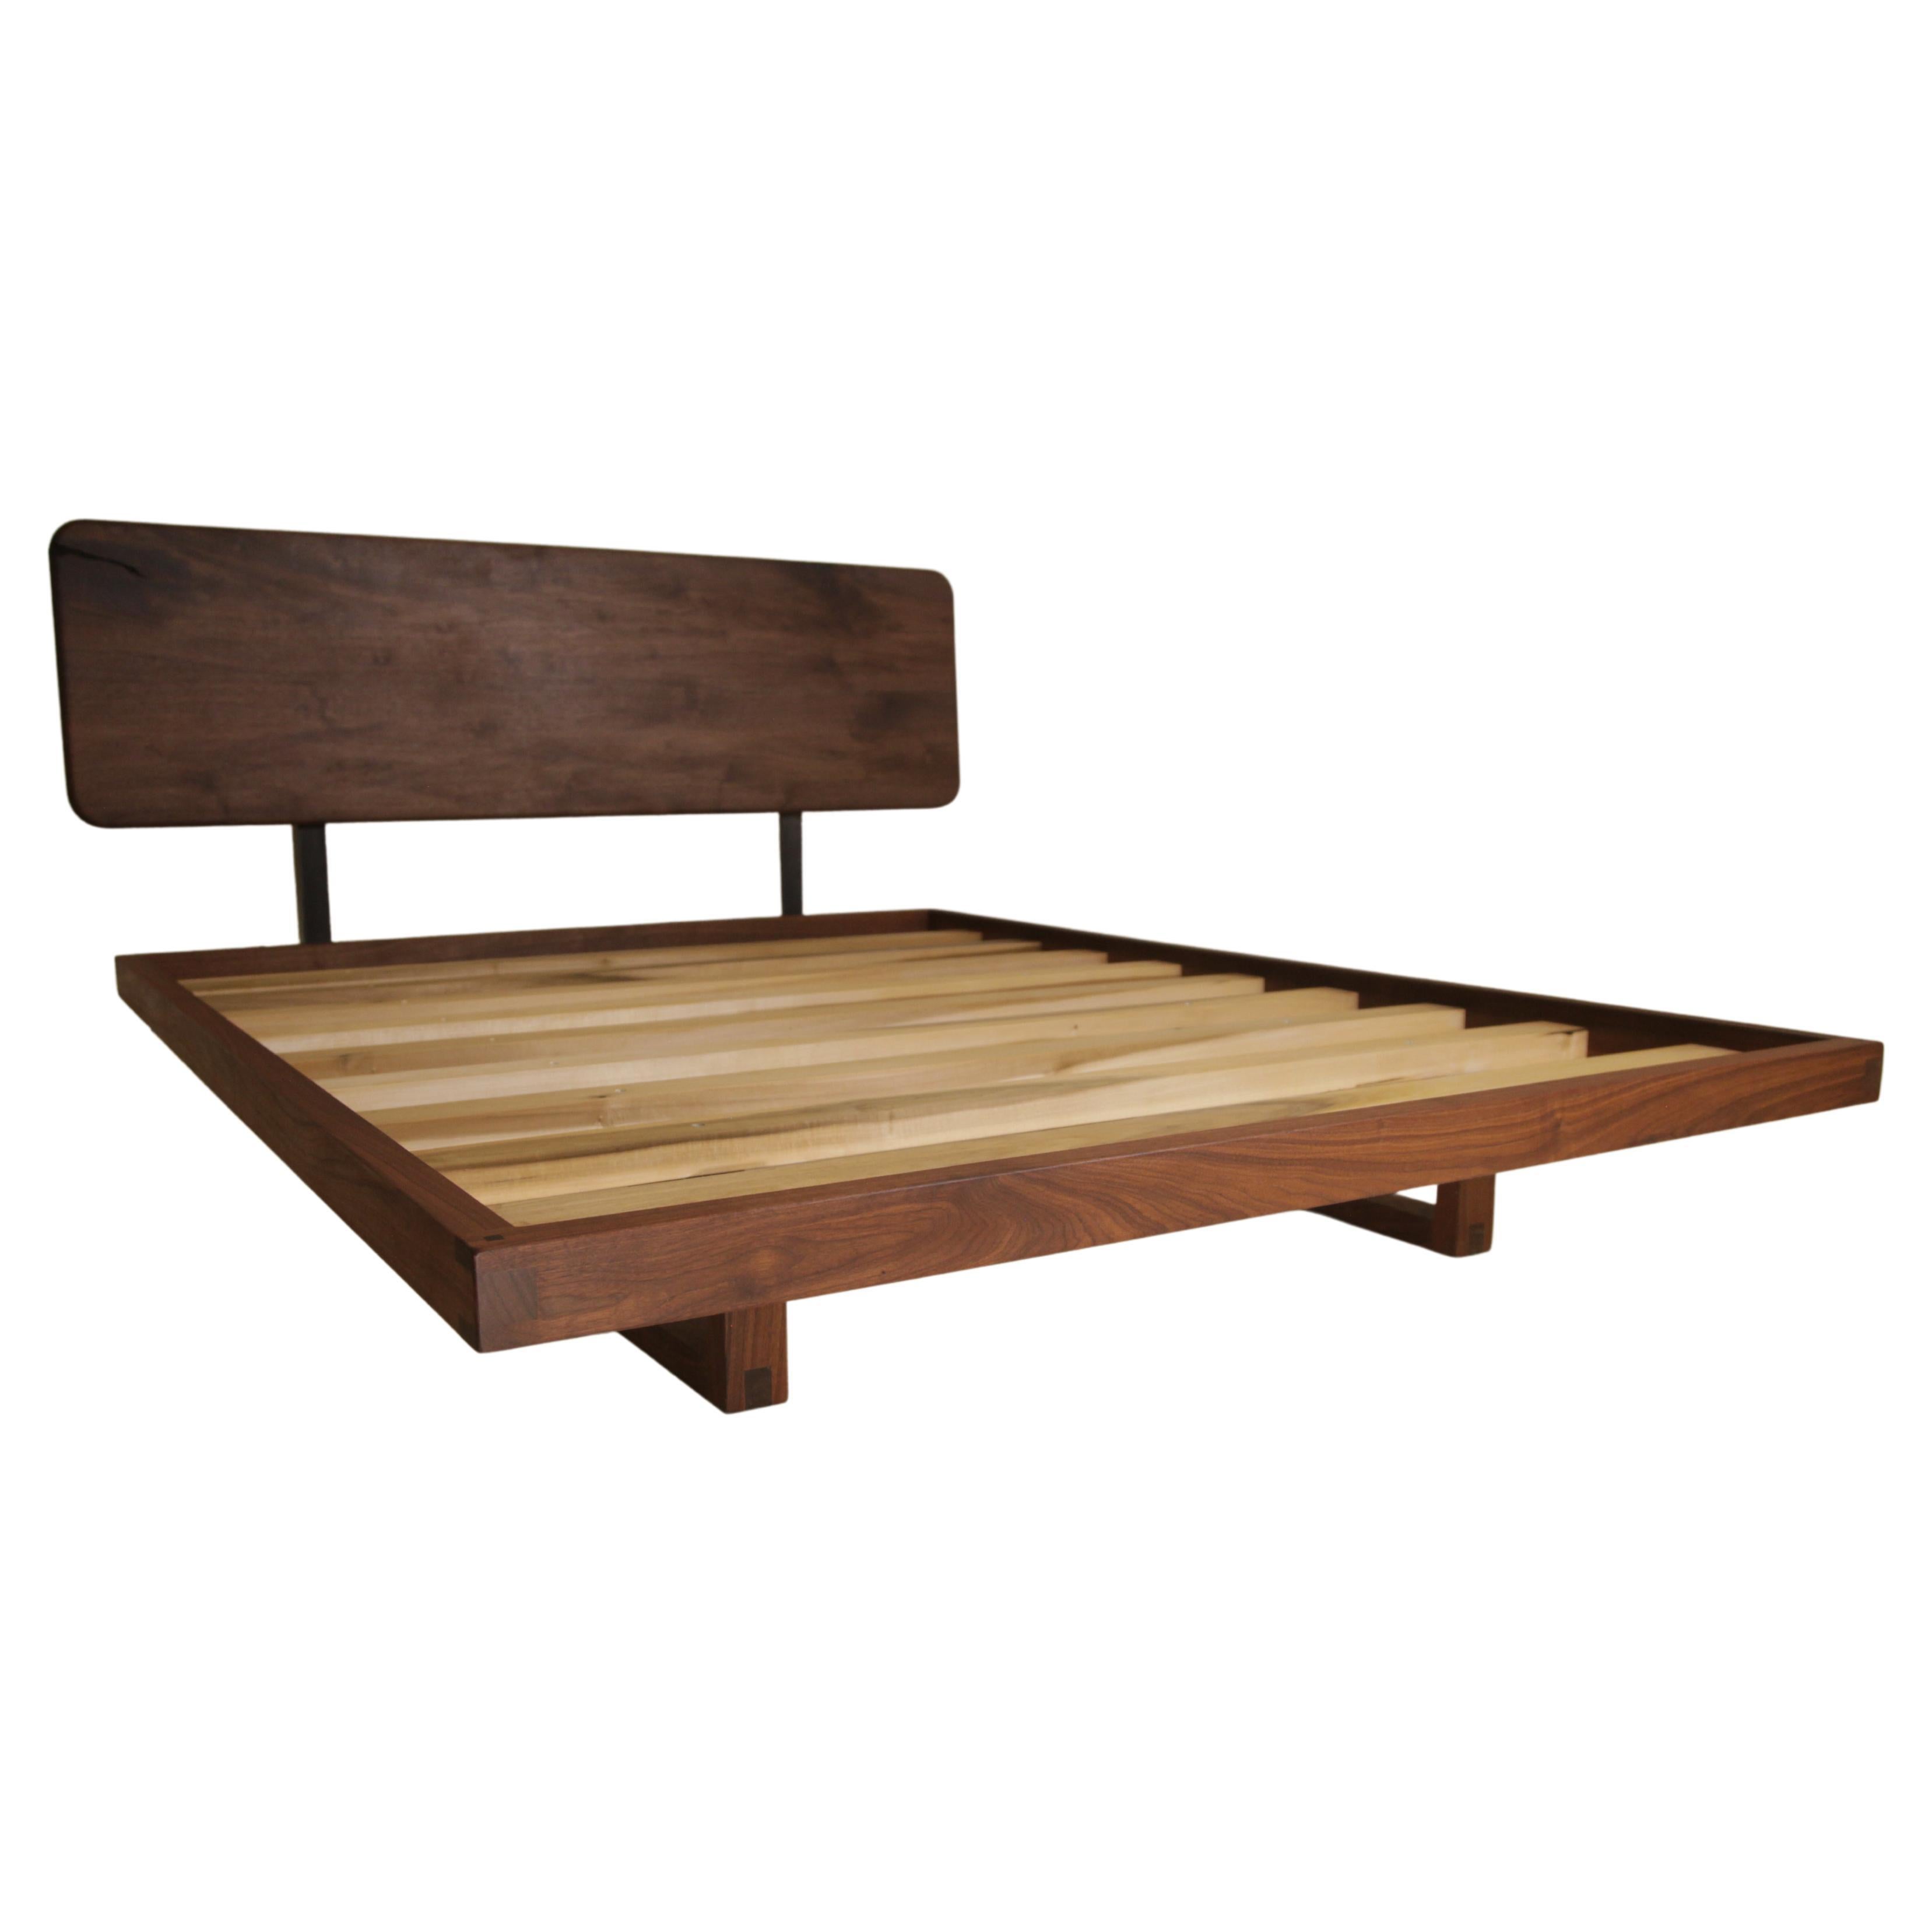 This contemporary walnut floating platform bed was originally designed for my own bedroom. It is priced and pictured as a queen with a dimensional walnut headboard, both the live edge and the dimensional headboards are seen and available. If